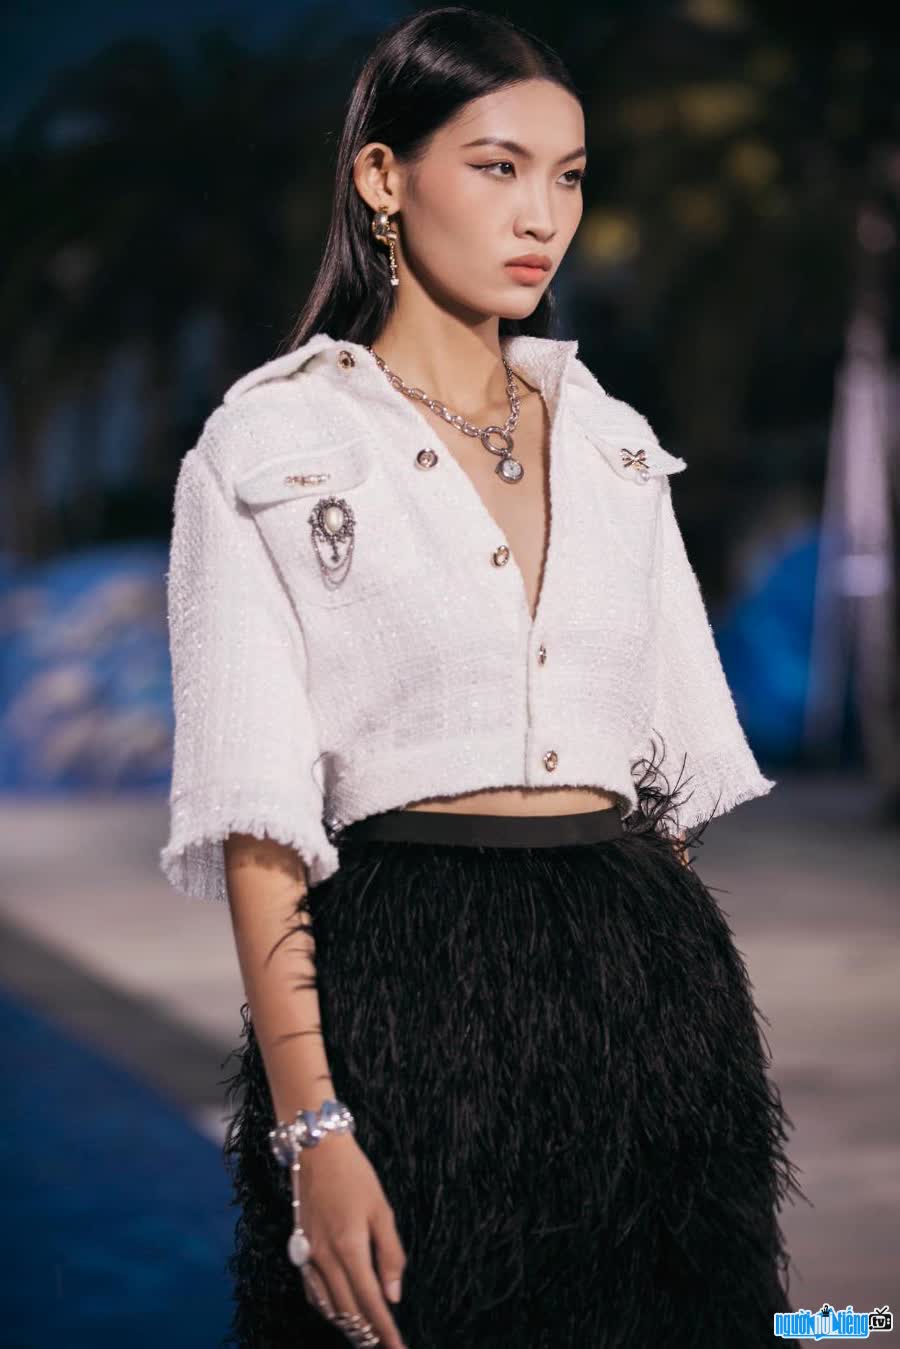 Image of model Huynh Tu Anh confidently strode on the catwalk